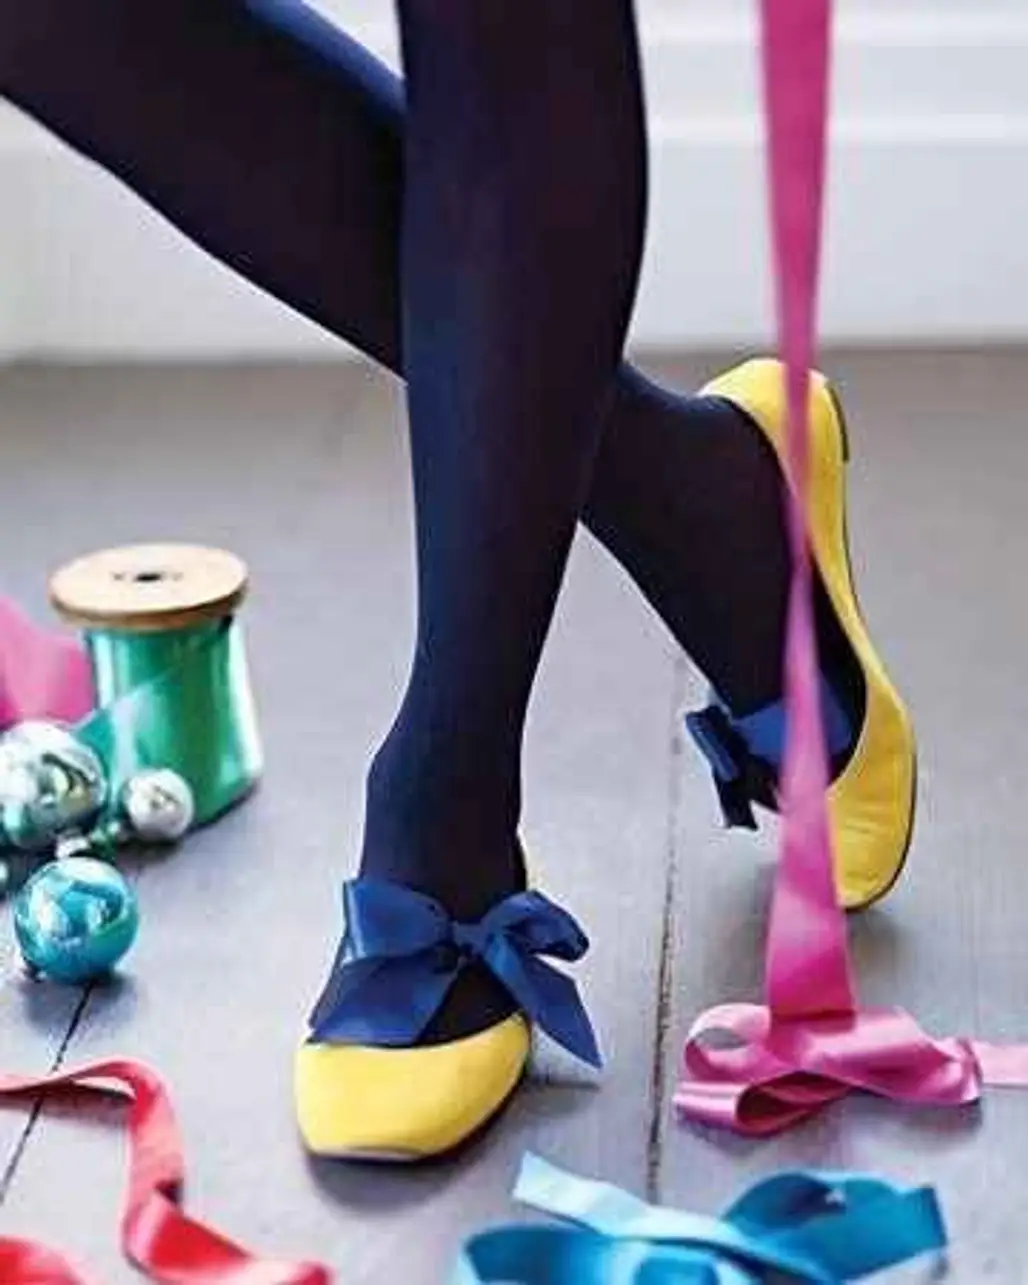 Tie a Ribbon around Your Feet and then Slip on Some Flats to One-up a Simple Look